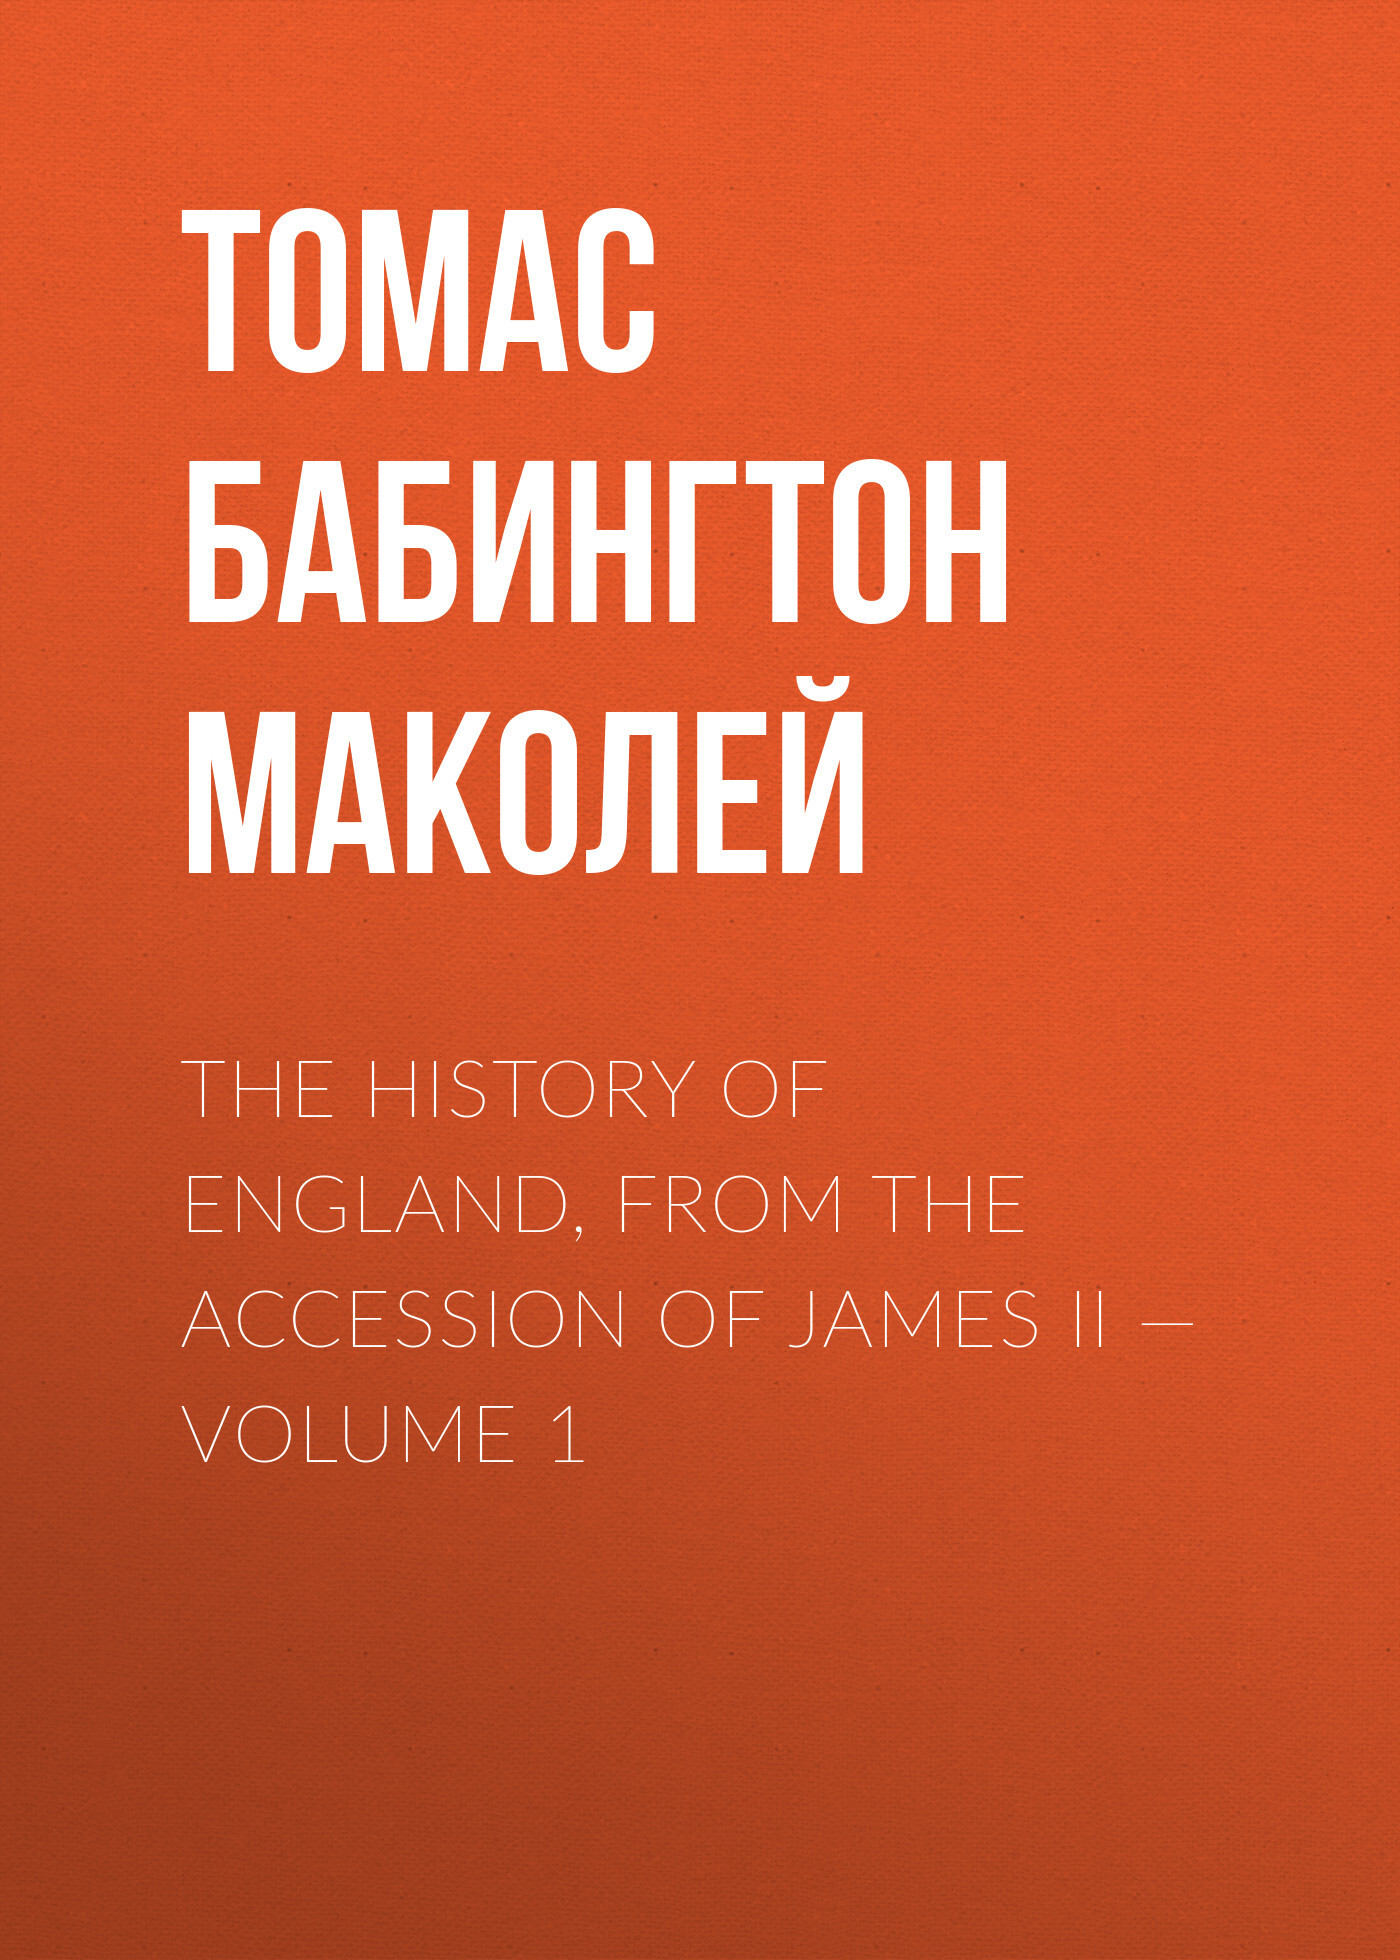 The History of England, from the Accession of James II— Volume 1